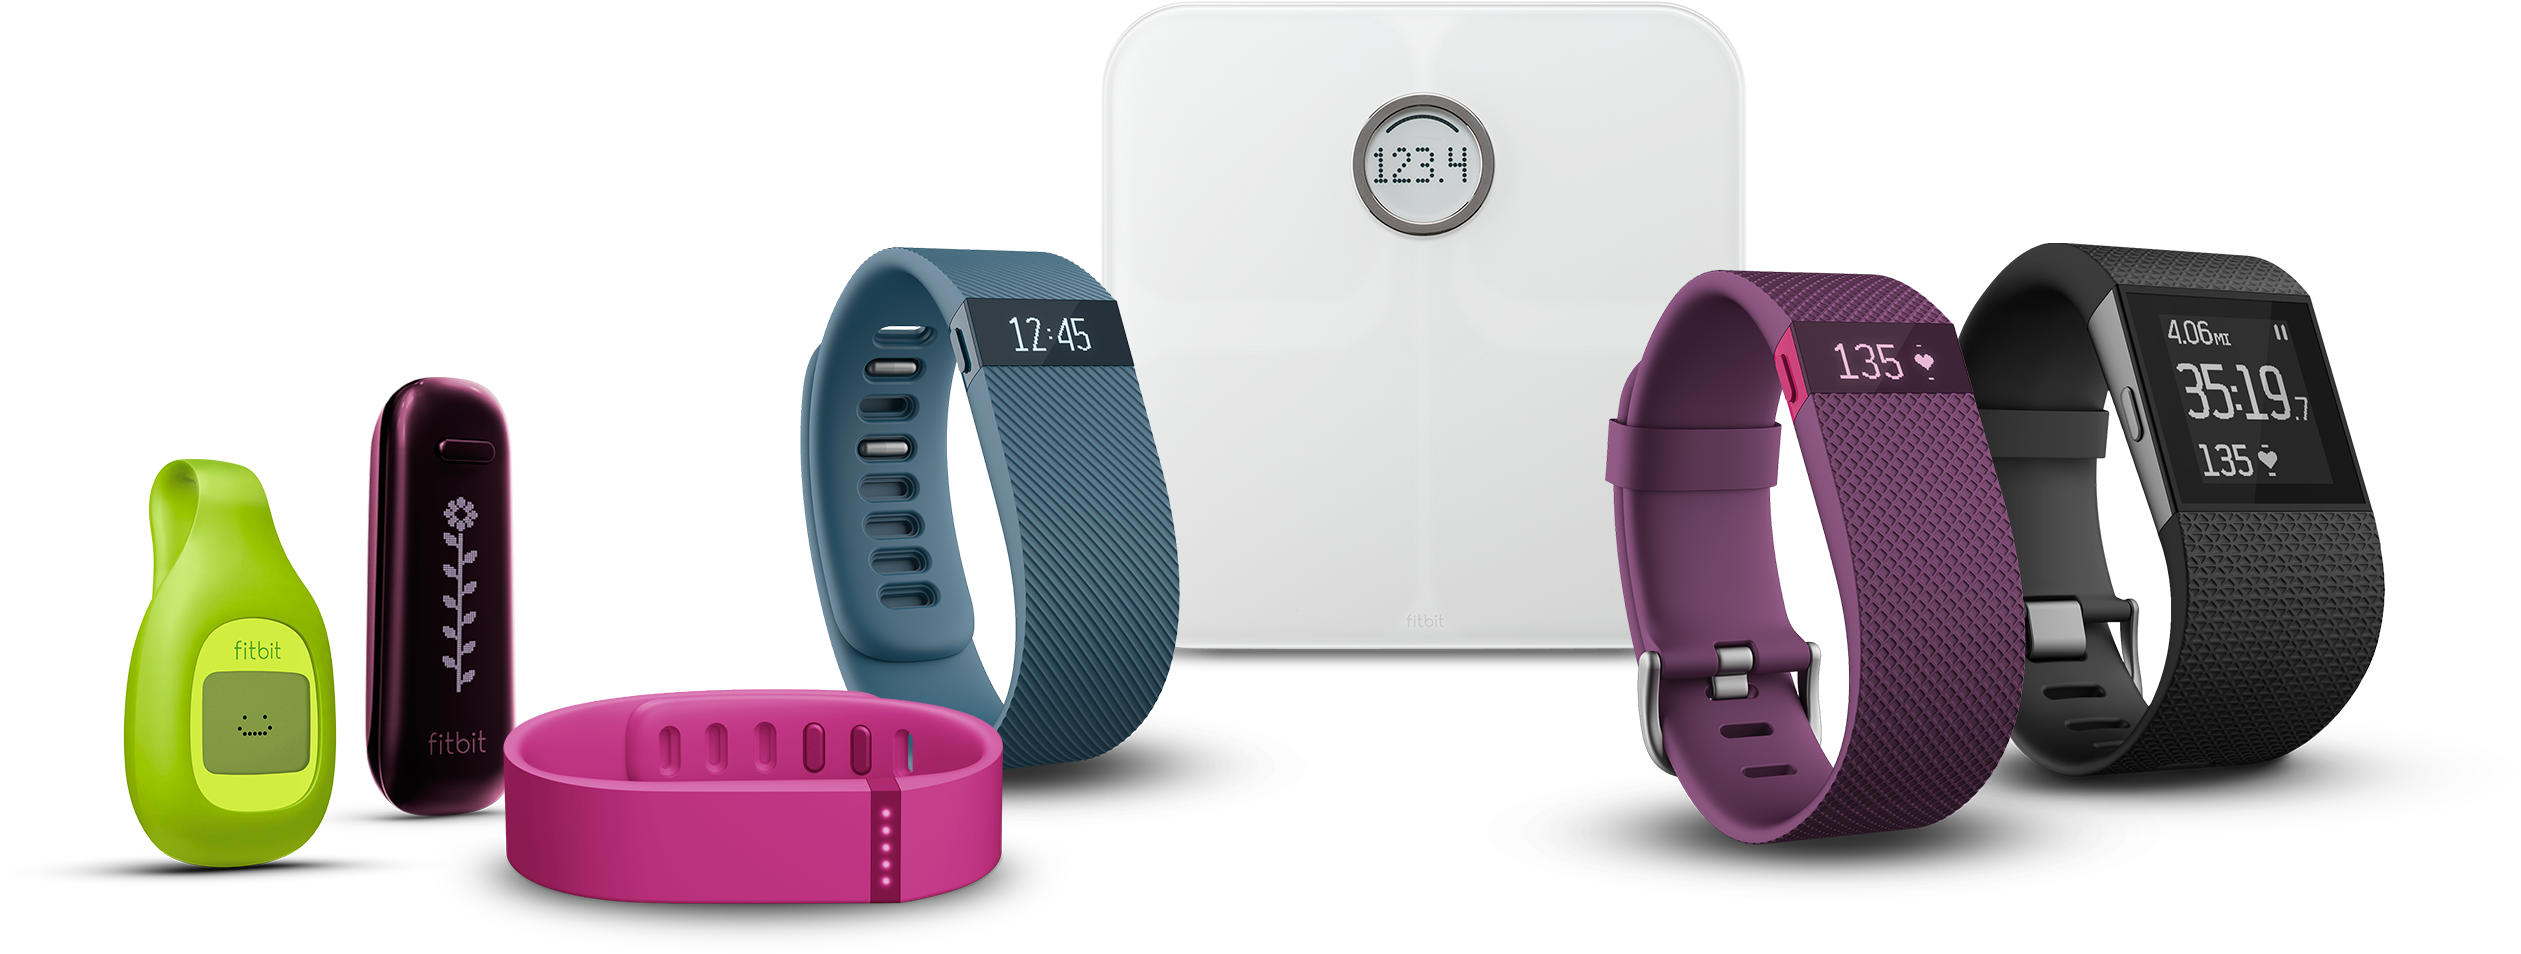 Fitbit Product Family Lineup - Fitbit Surge Fitness Super Watch Extra Large Black (3000x1422), Png Download